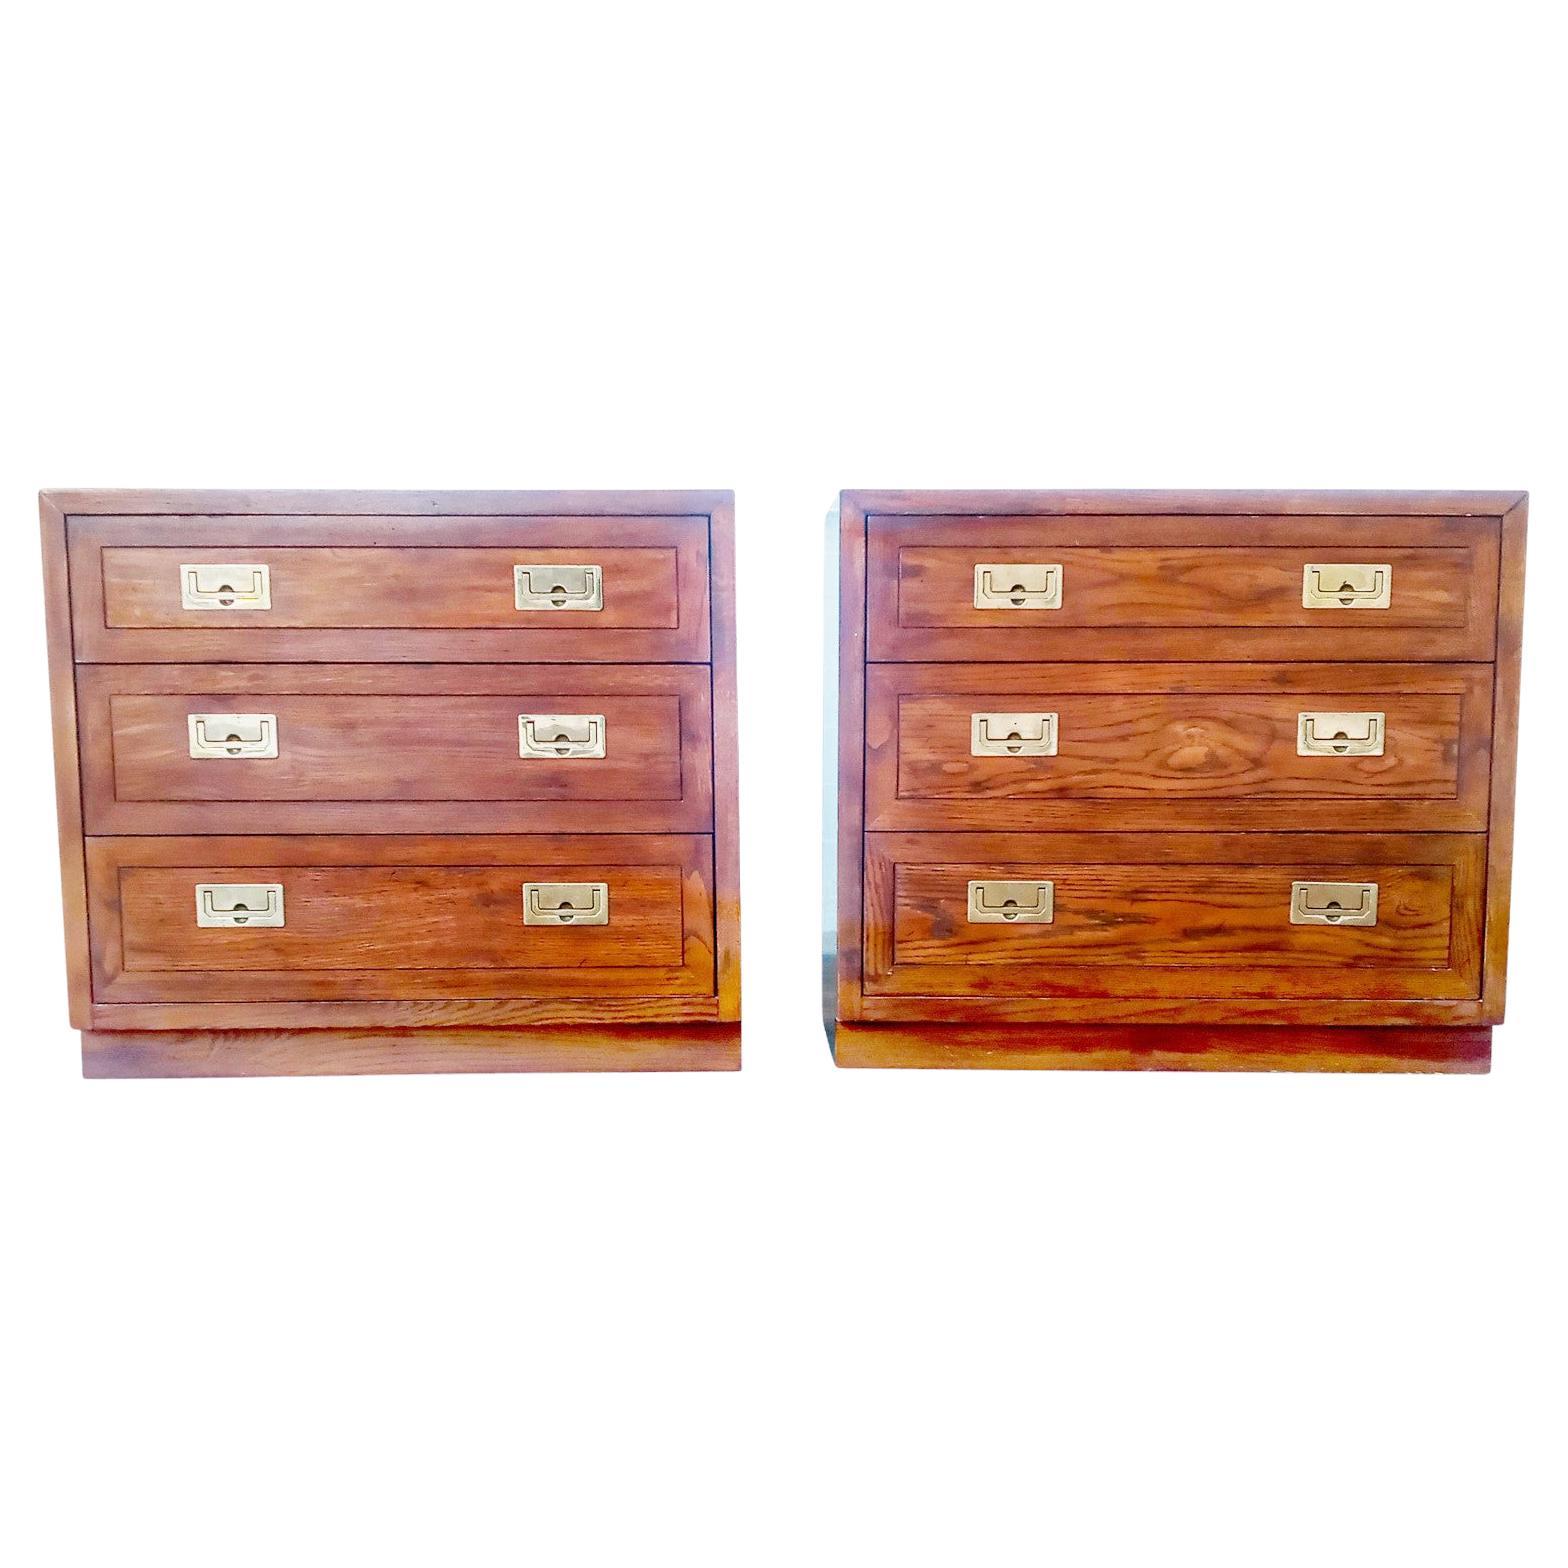 A wonderful pair of small dressers or large nightstands with original satin sheen finish on distressed oak with polished brass handles. Quality construction. Wonderful Campaign styling. The perfect size and style for just the right room.